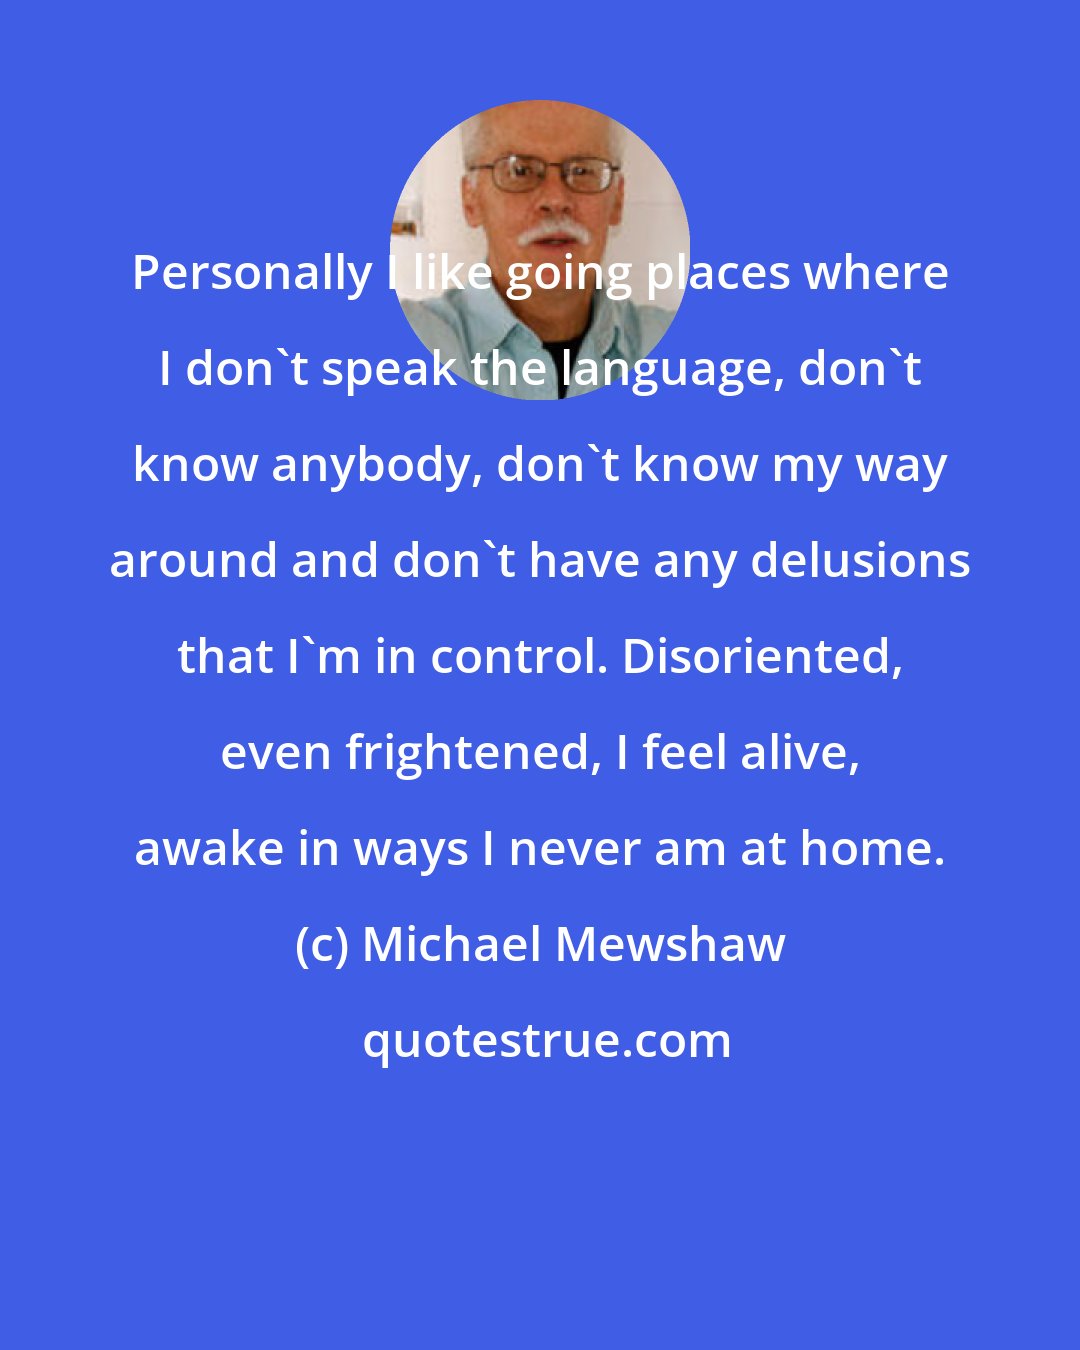 Michael Mewshaw: Personally I like going places where I don't speak the language, don't know anybody, don't know my way around and don't have any delusions that I'm in control. Disoriented, even frightened, I feel alive, awake in ways I never am at home.